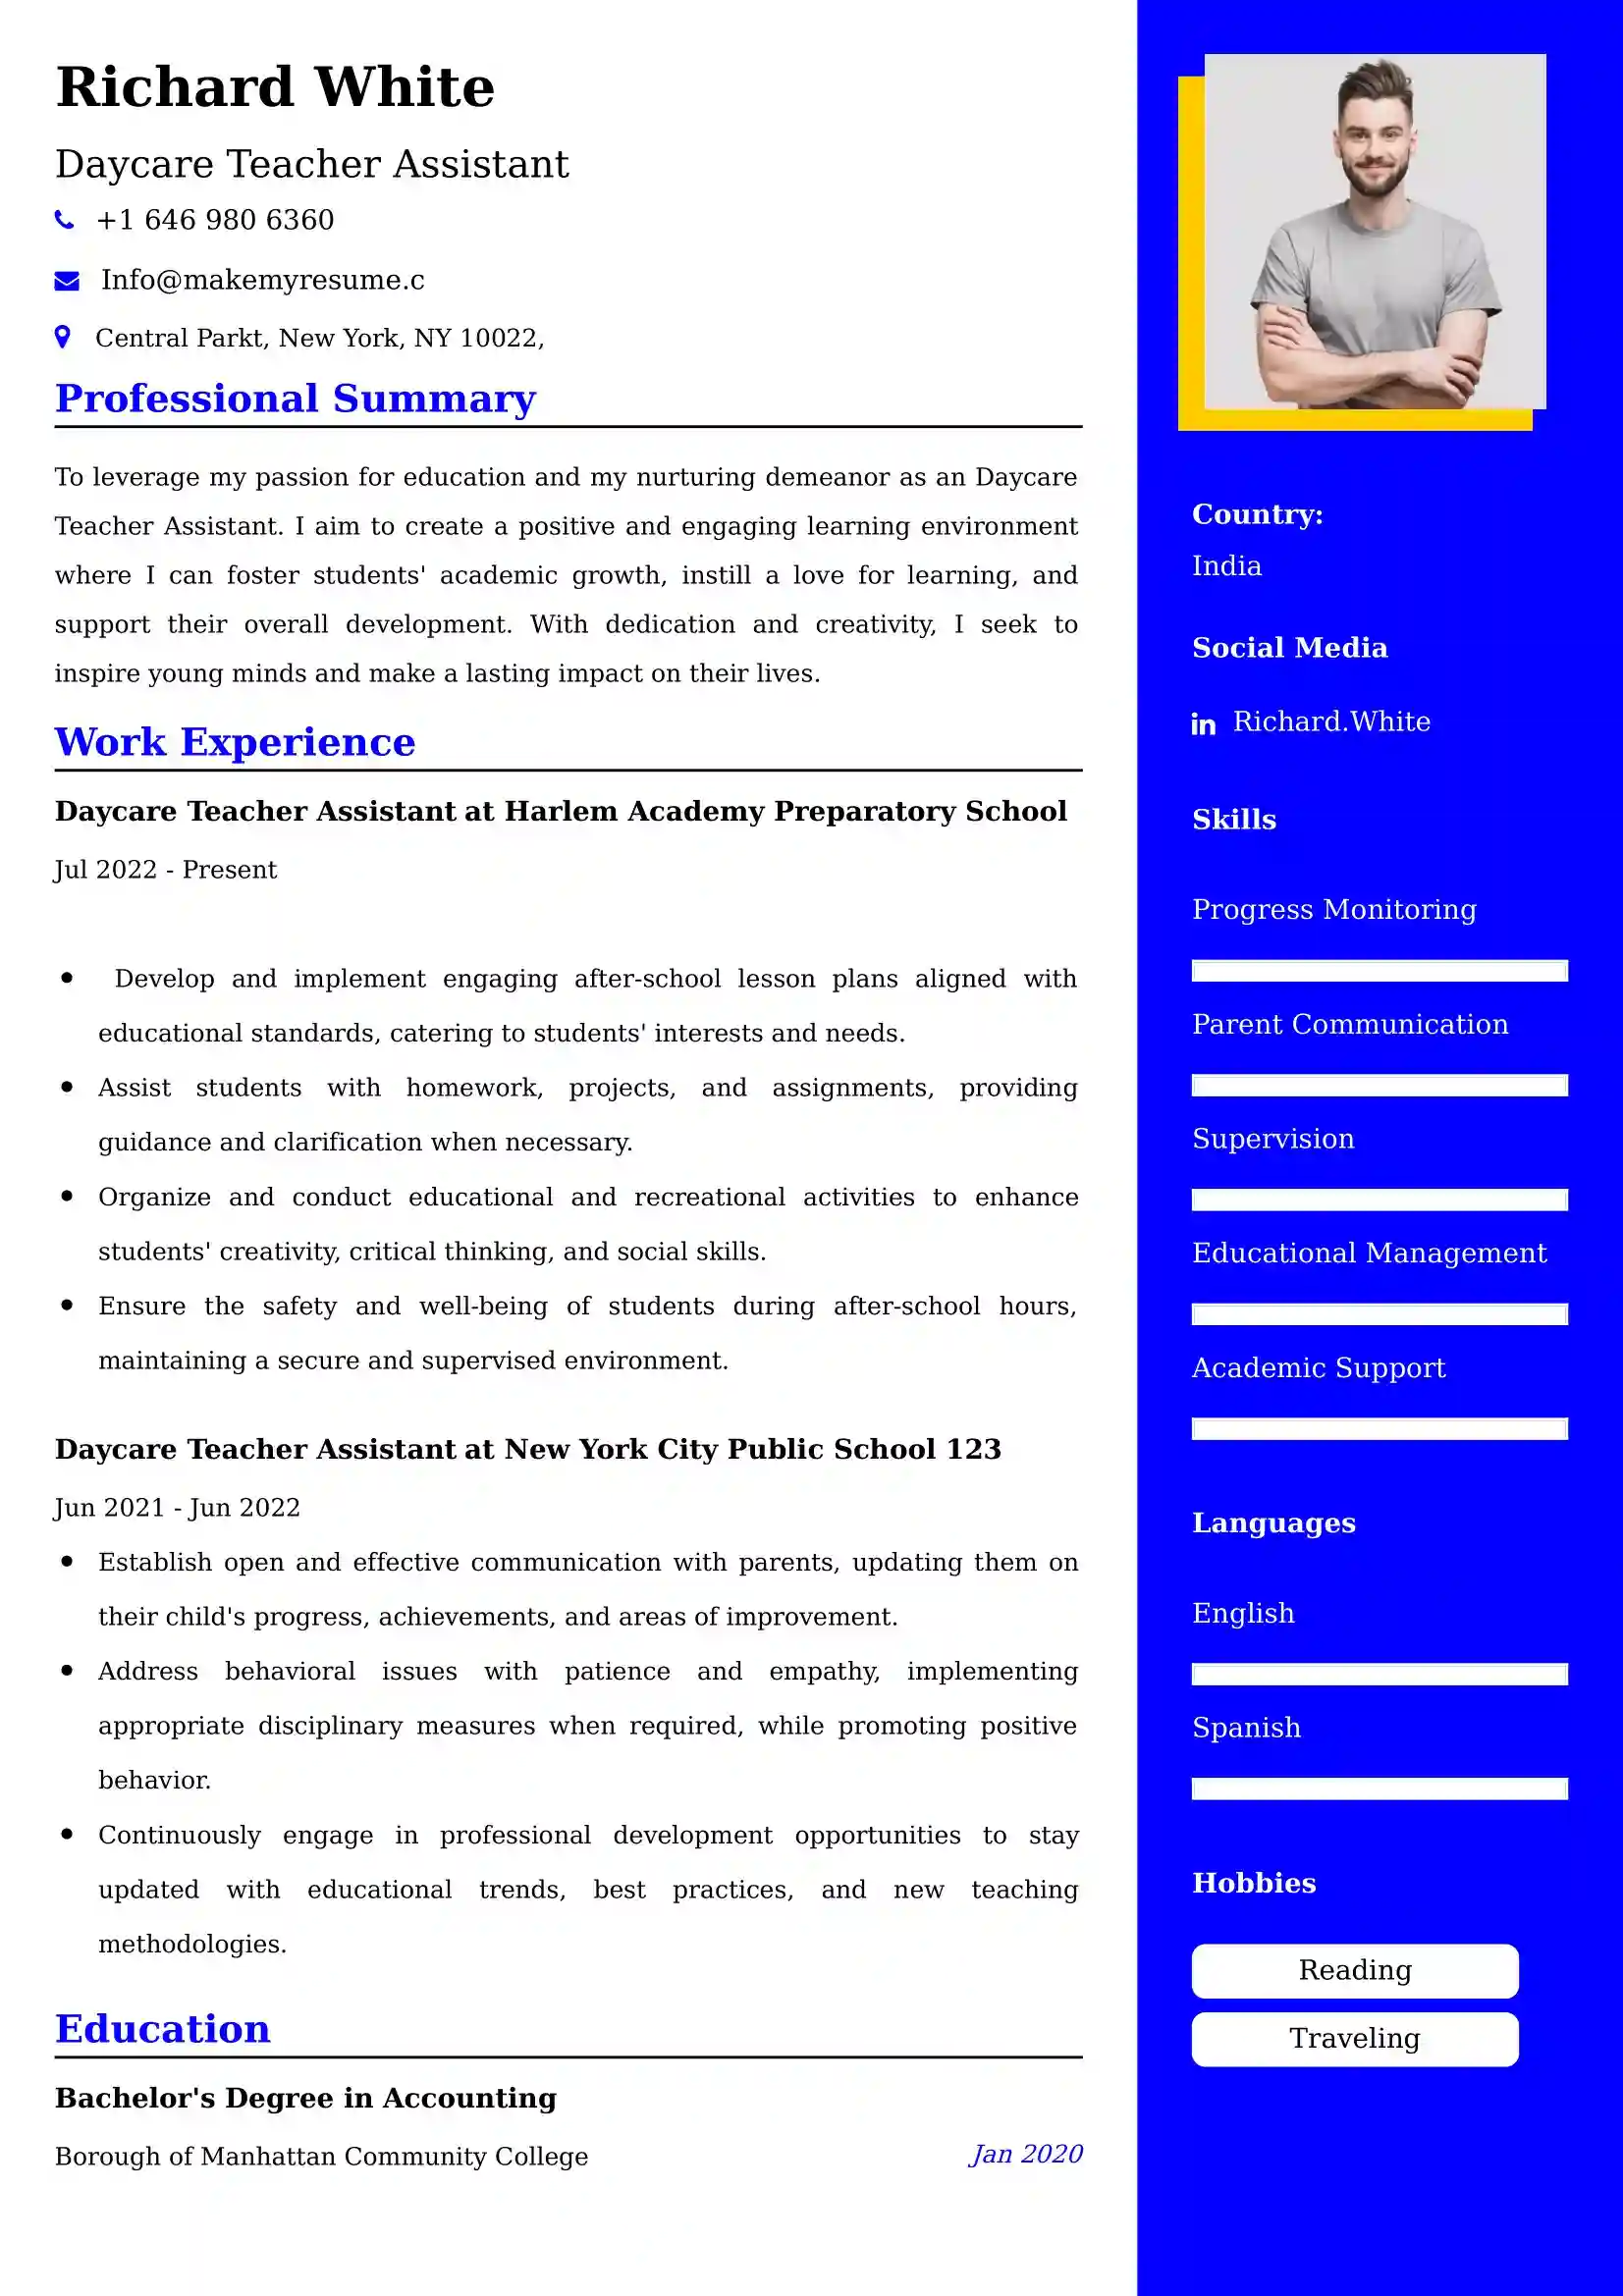 Daycare Teacher Assistant CV Examples Malaysia